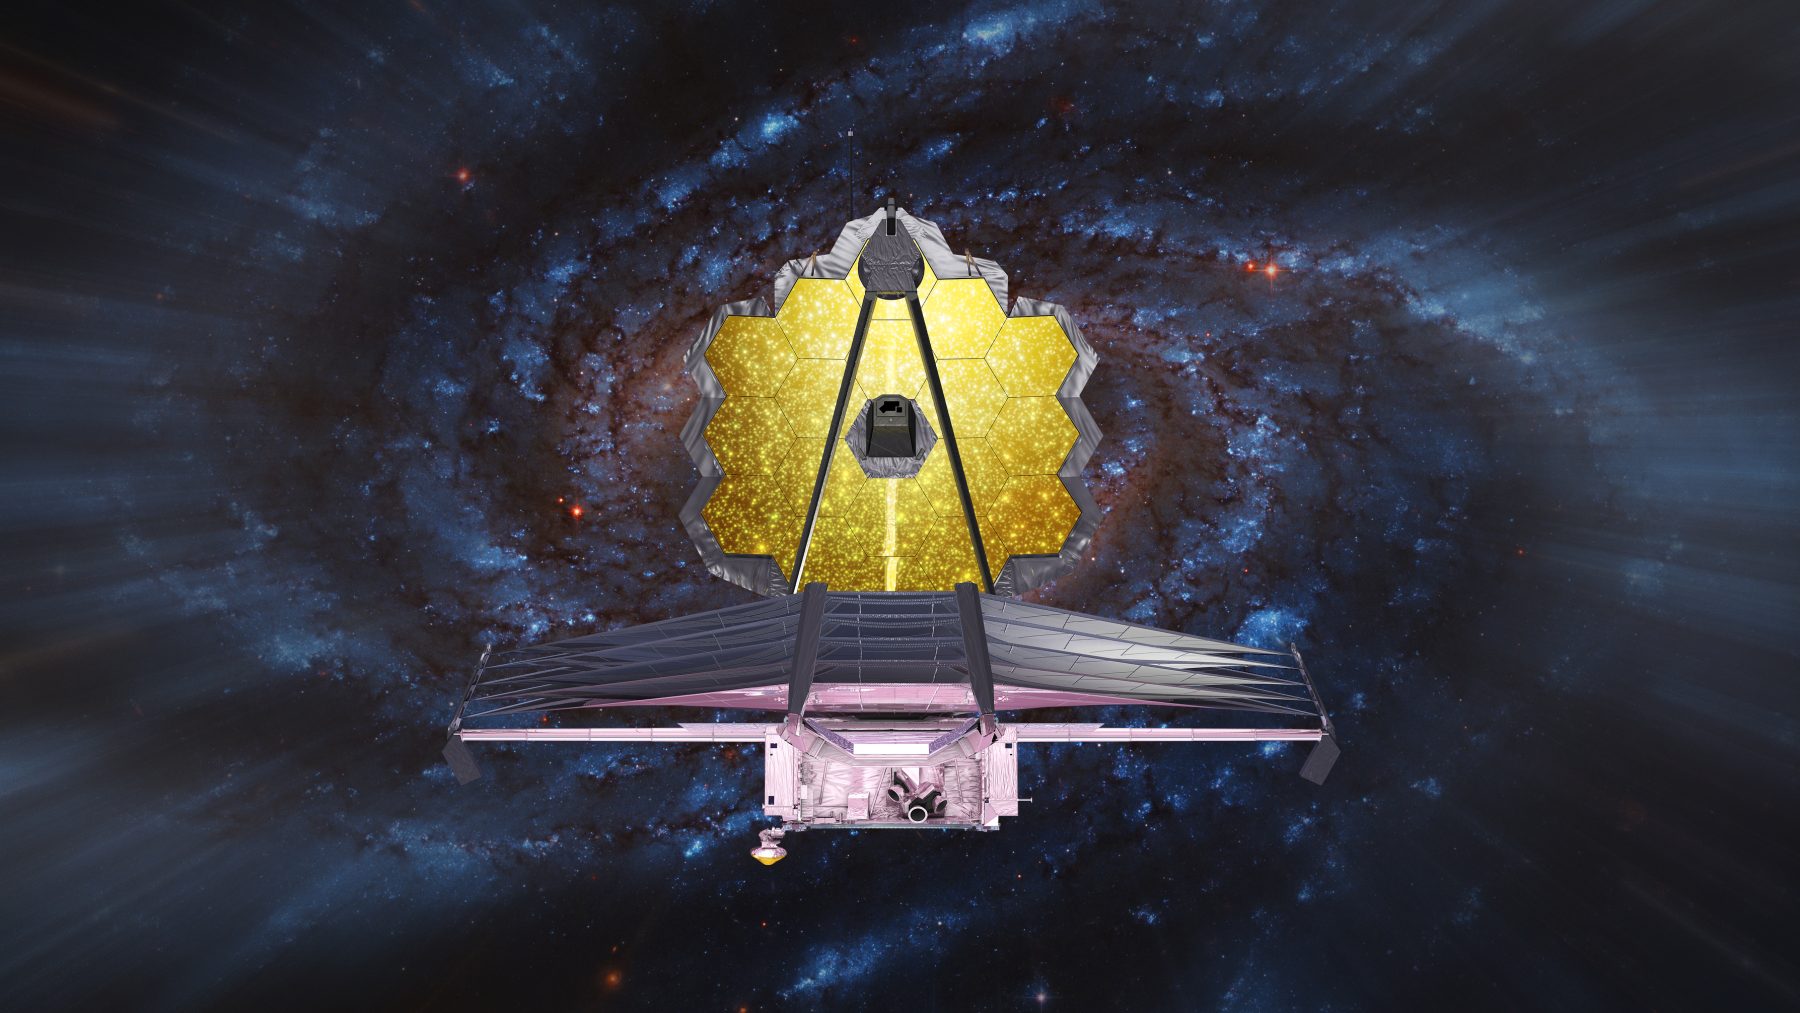 Can the James Webb telescope find life on distant exoplanets